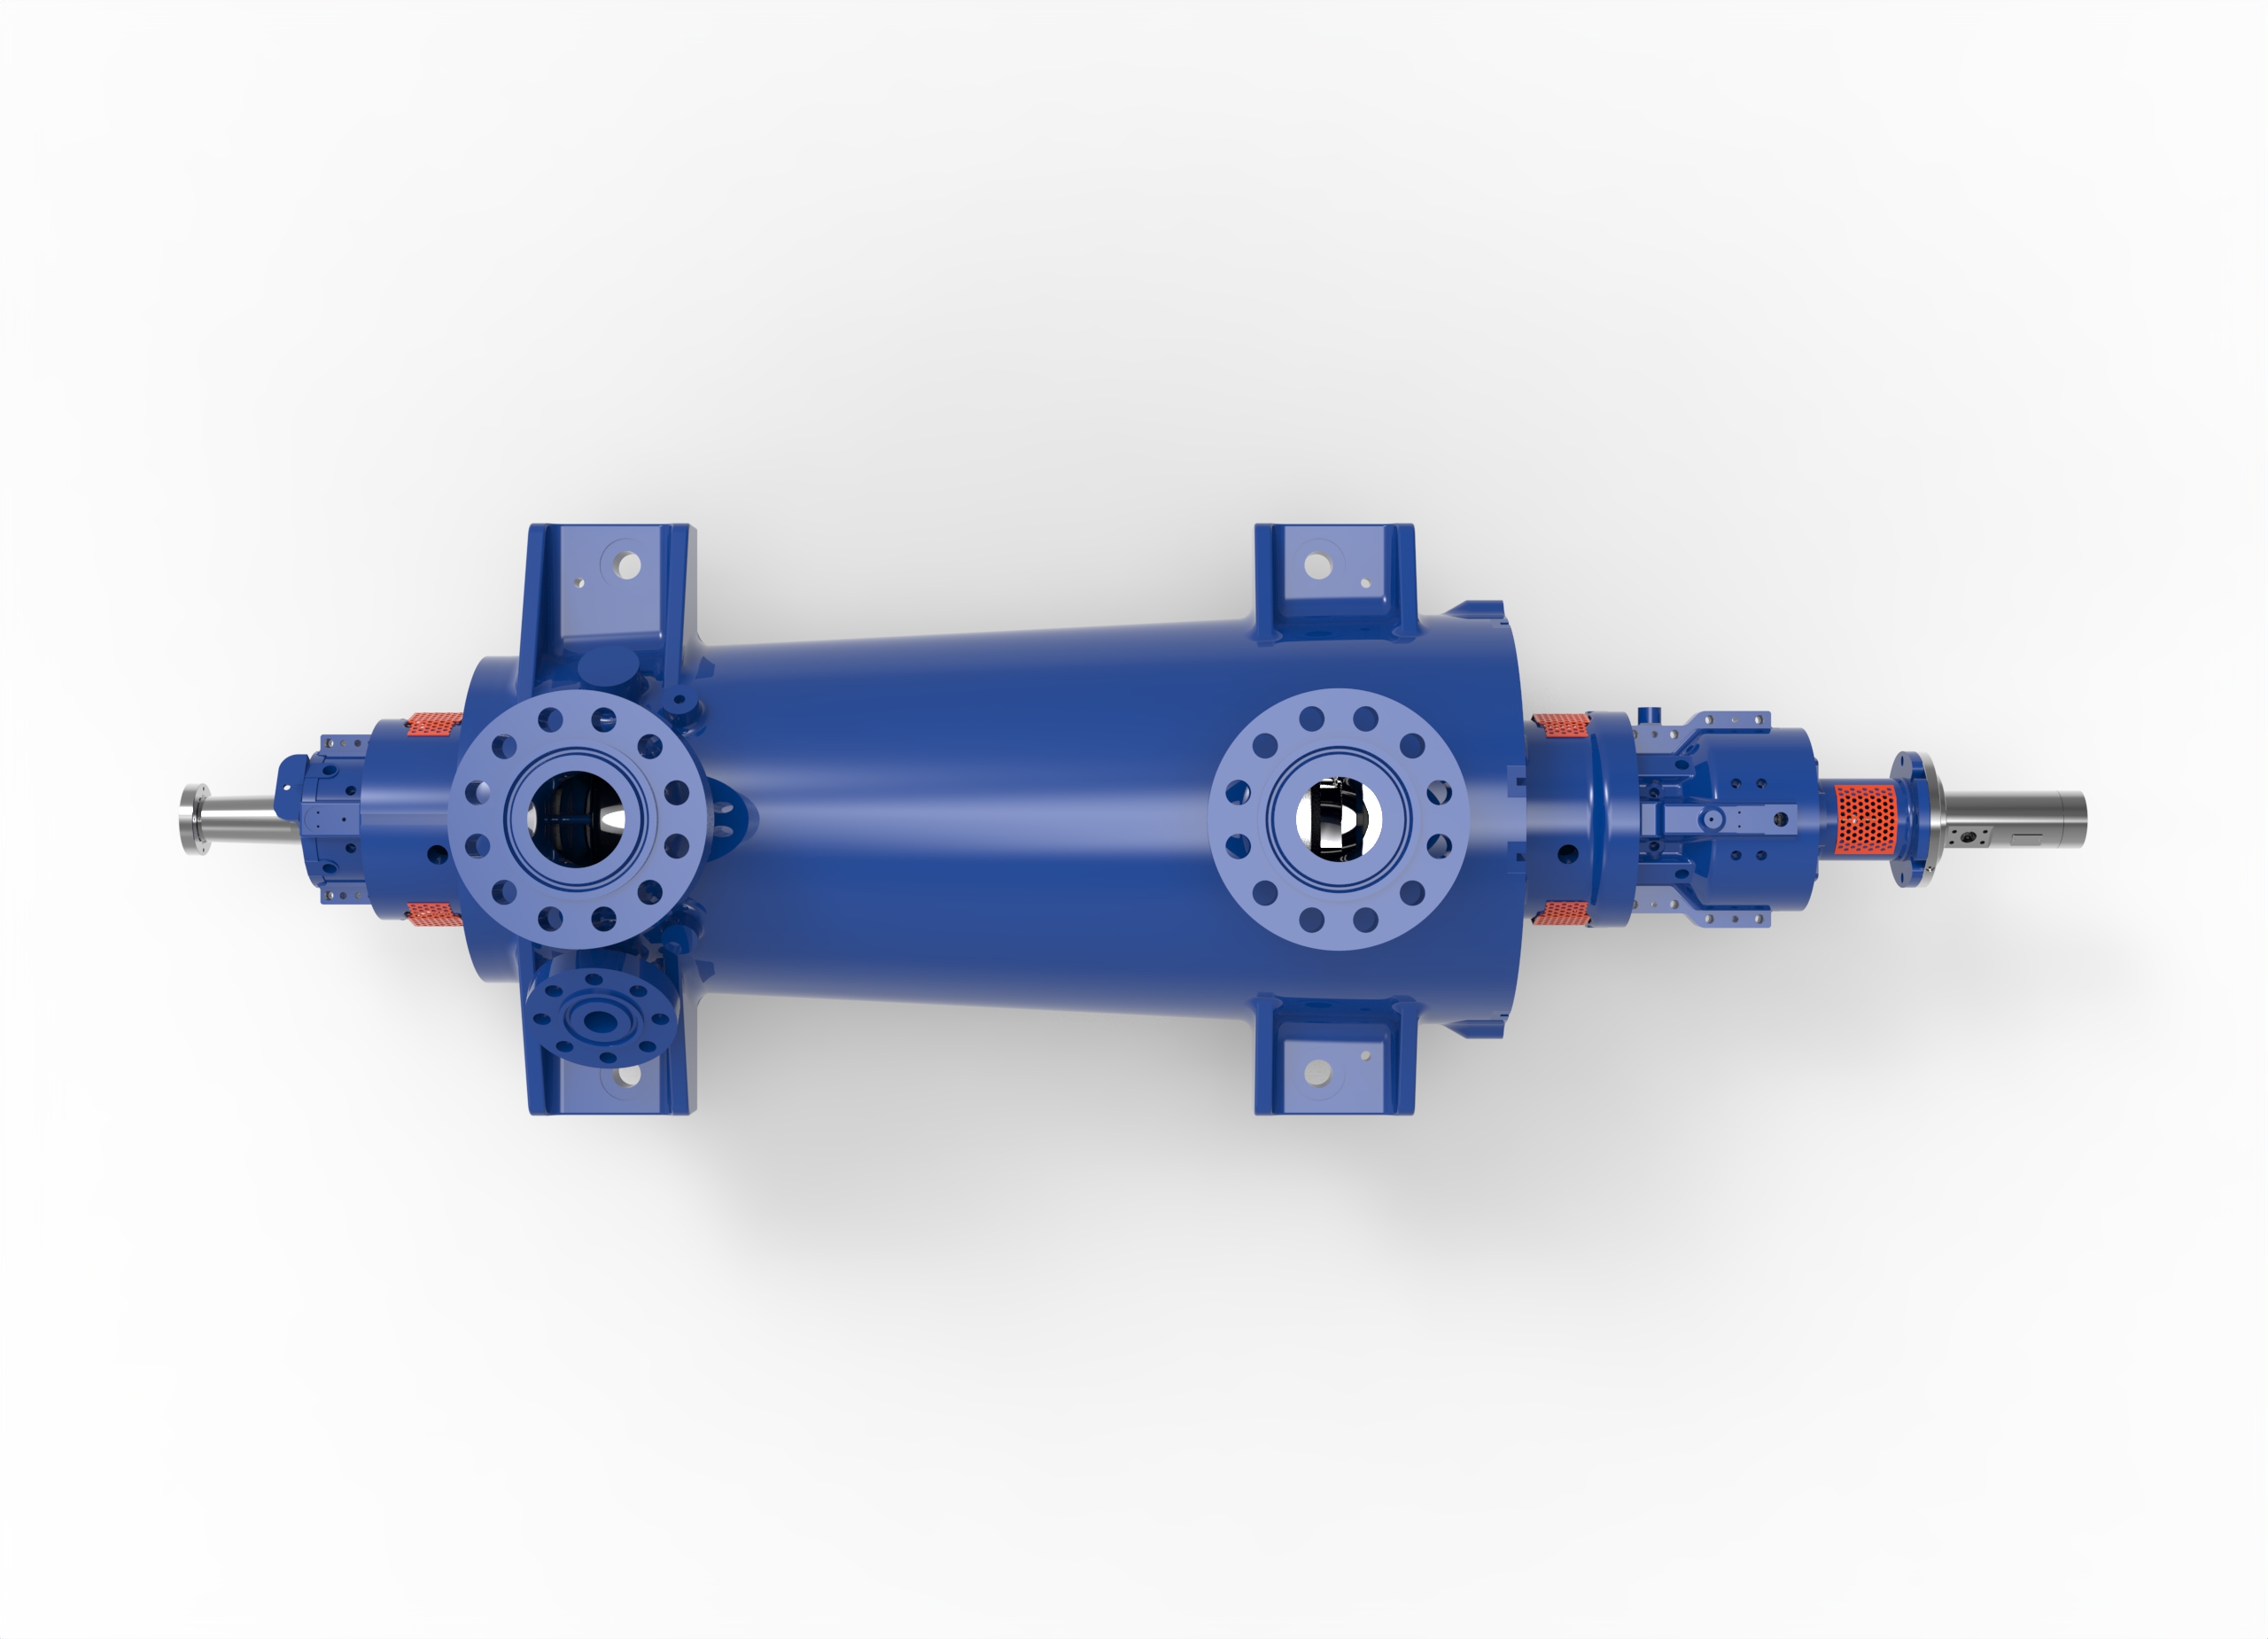 Top view of a Termomeccanica Pompe MESB & MESBD BB5 TYPE API 610 Centrifugal Pump manufactured by Trillium Flow Technologies